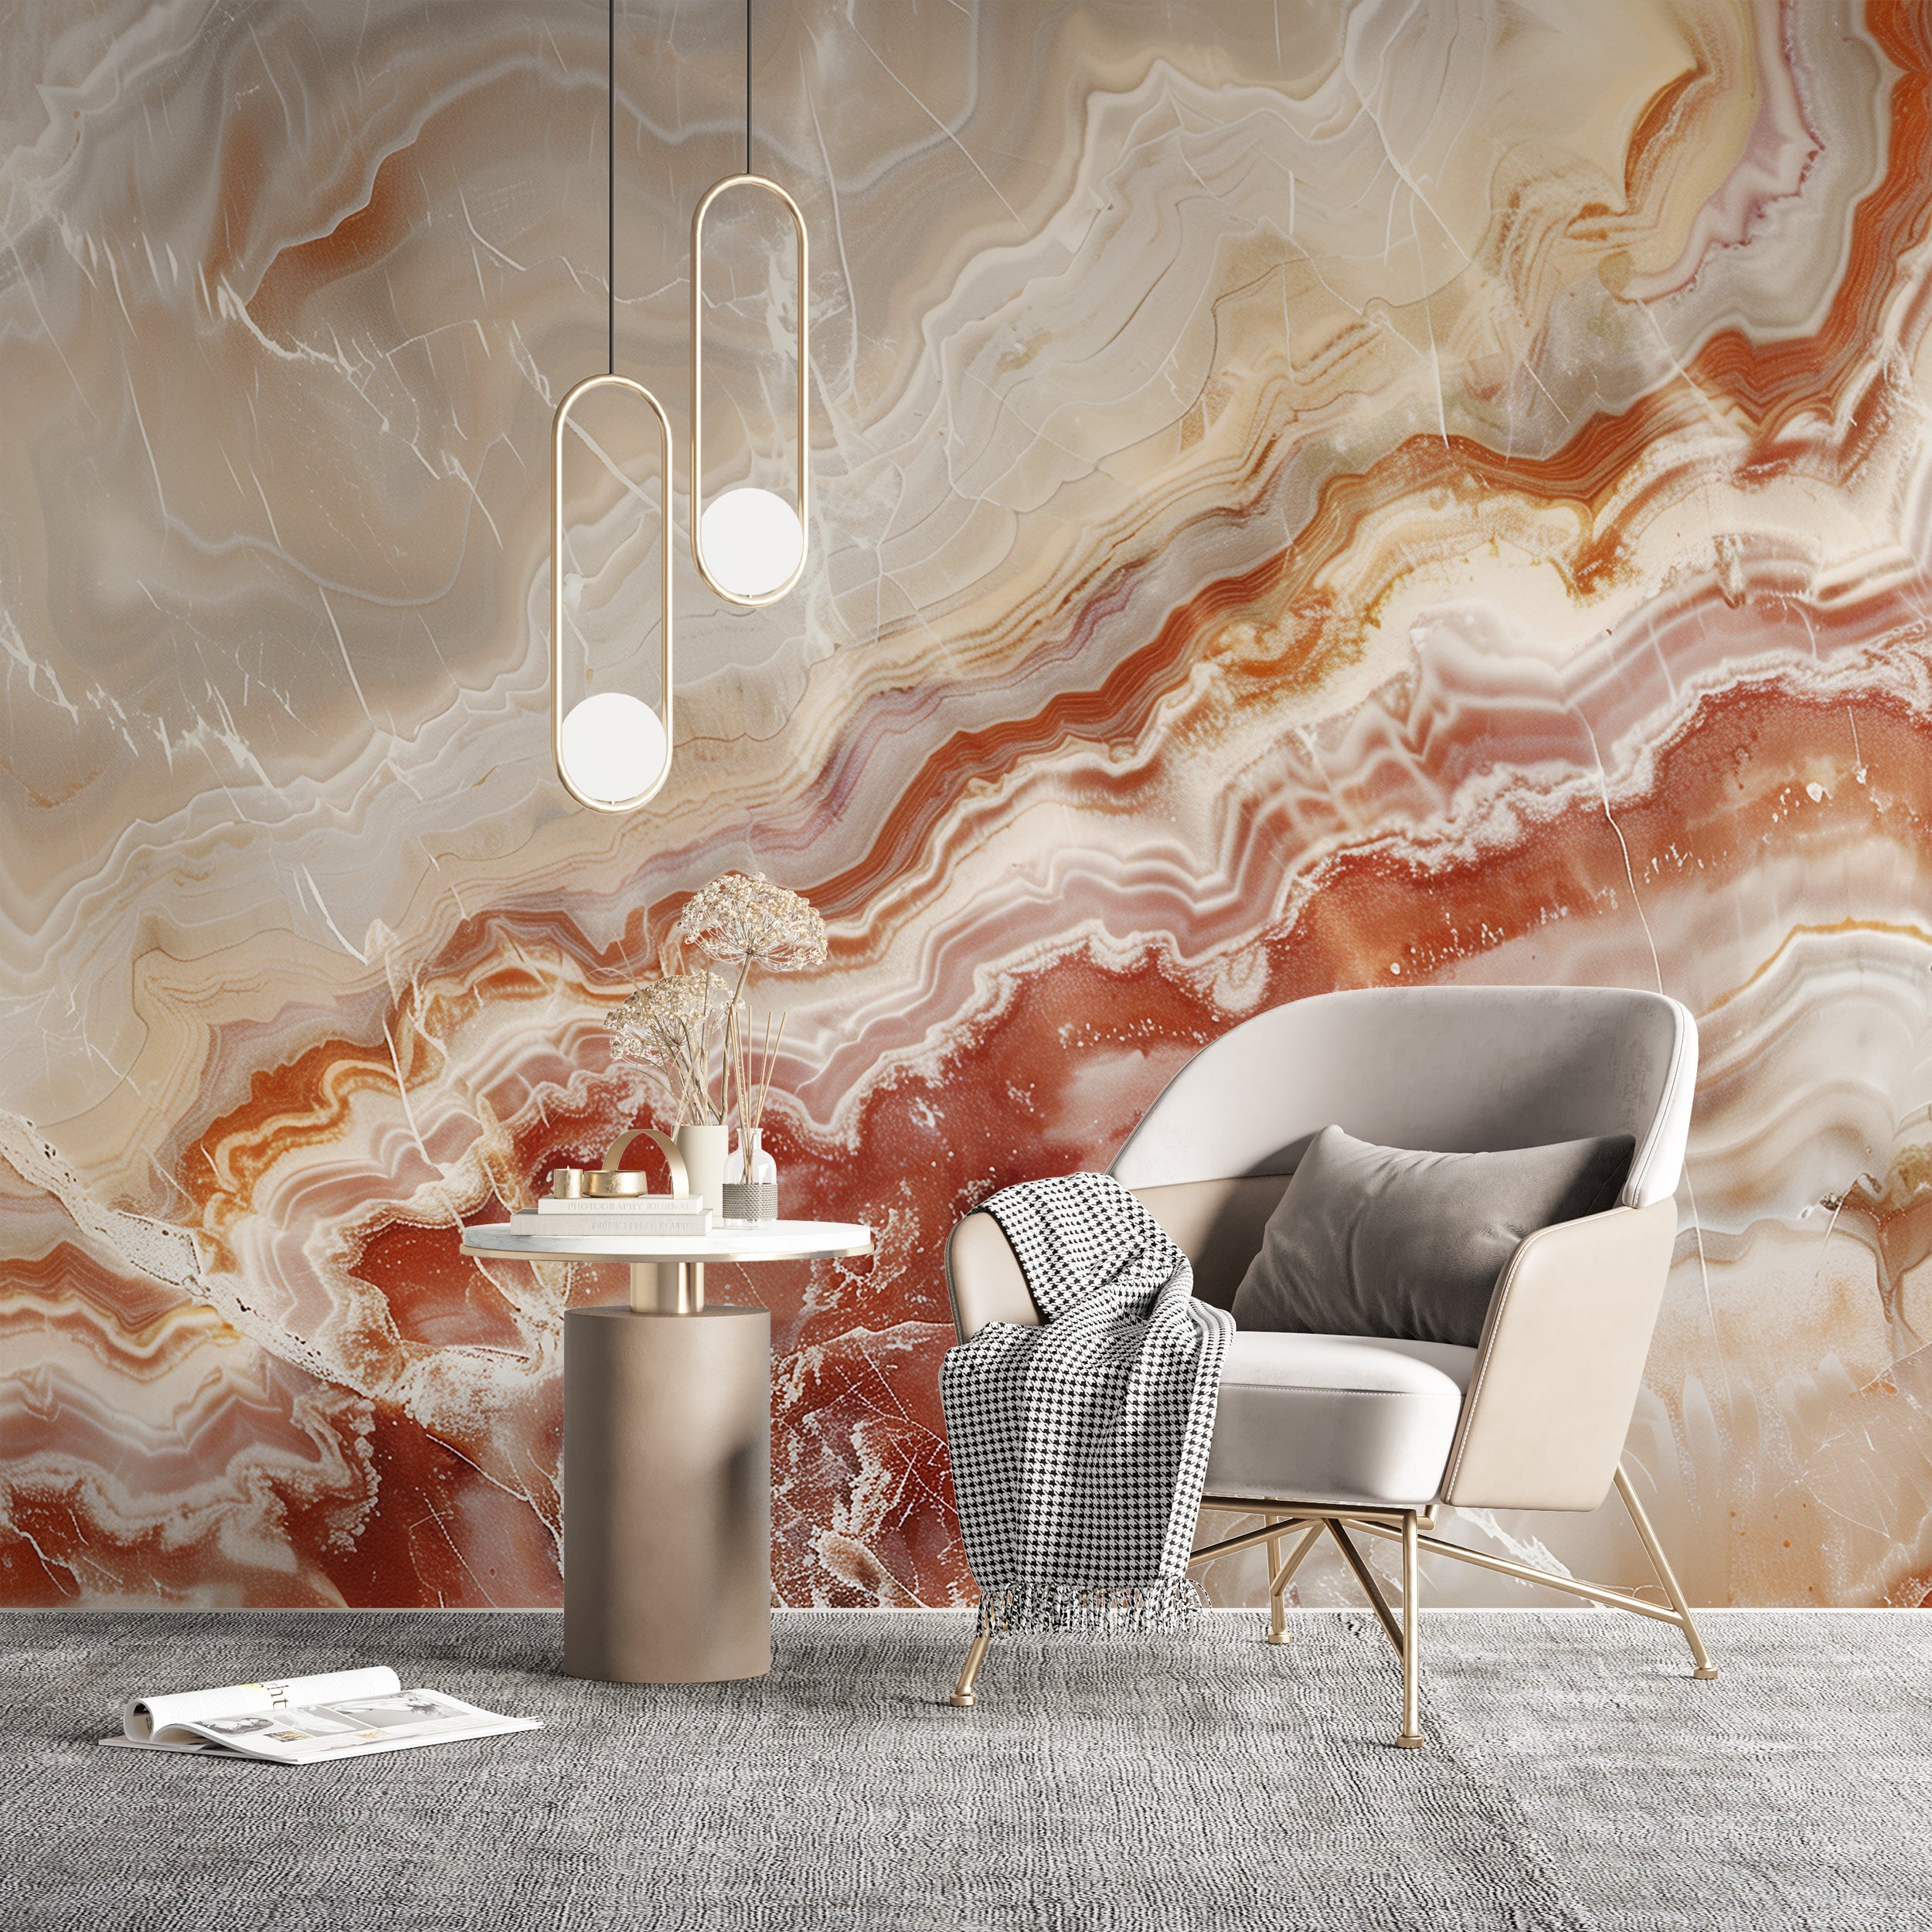 Peach Marble Wallpaper, Beige and Orange Marble Mural, Peel and Stick Removable Stone Wall Decor, Abstract Accent Natural Marble Mural